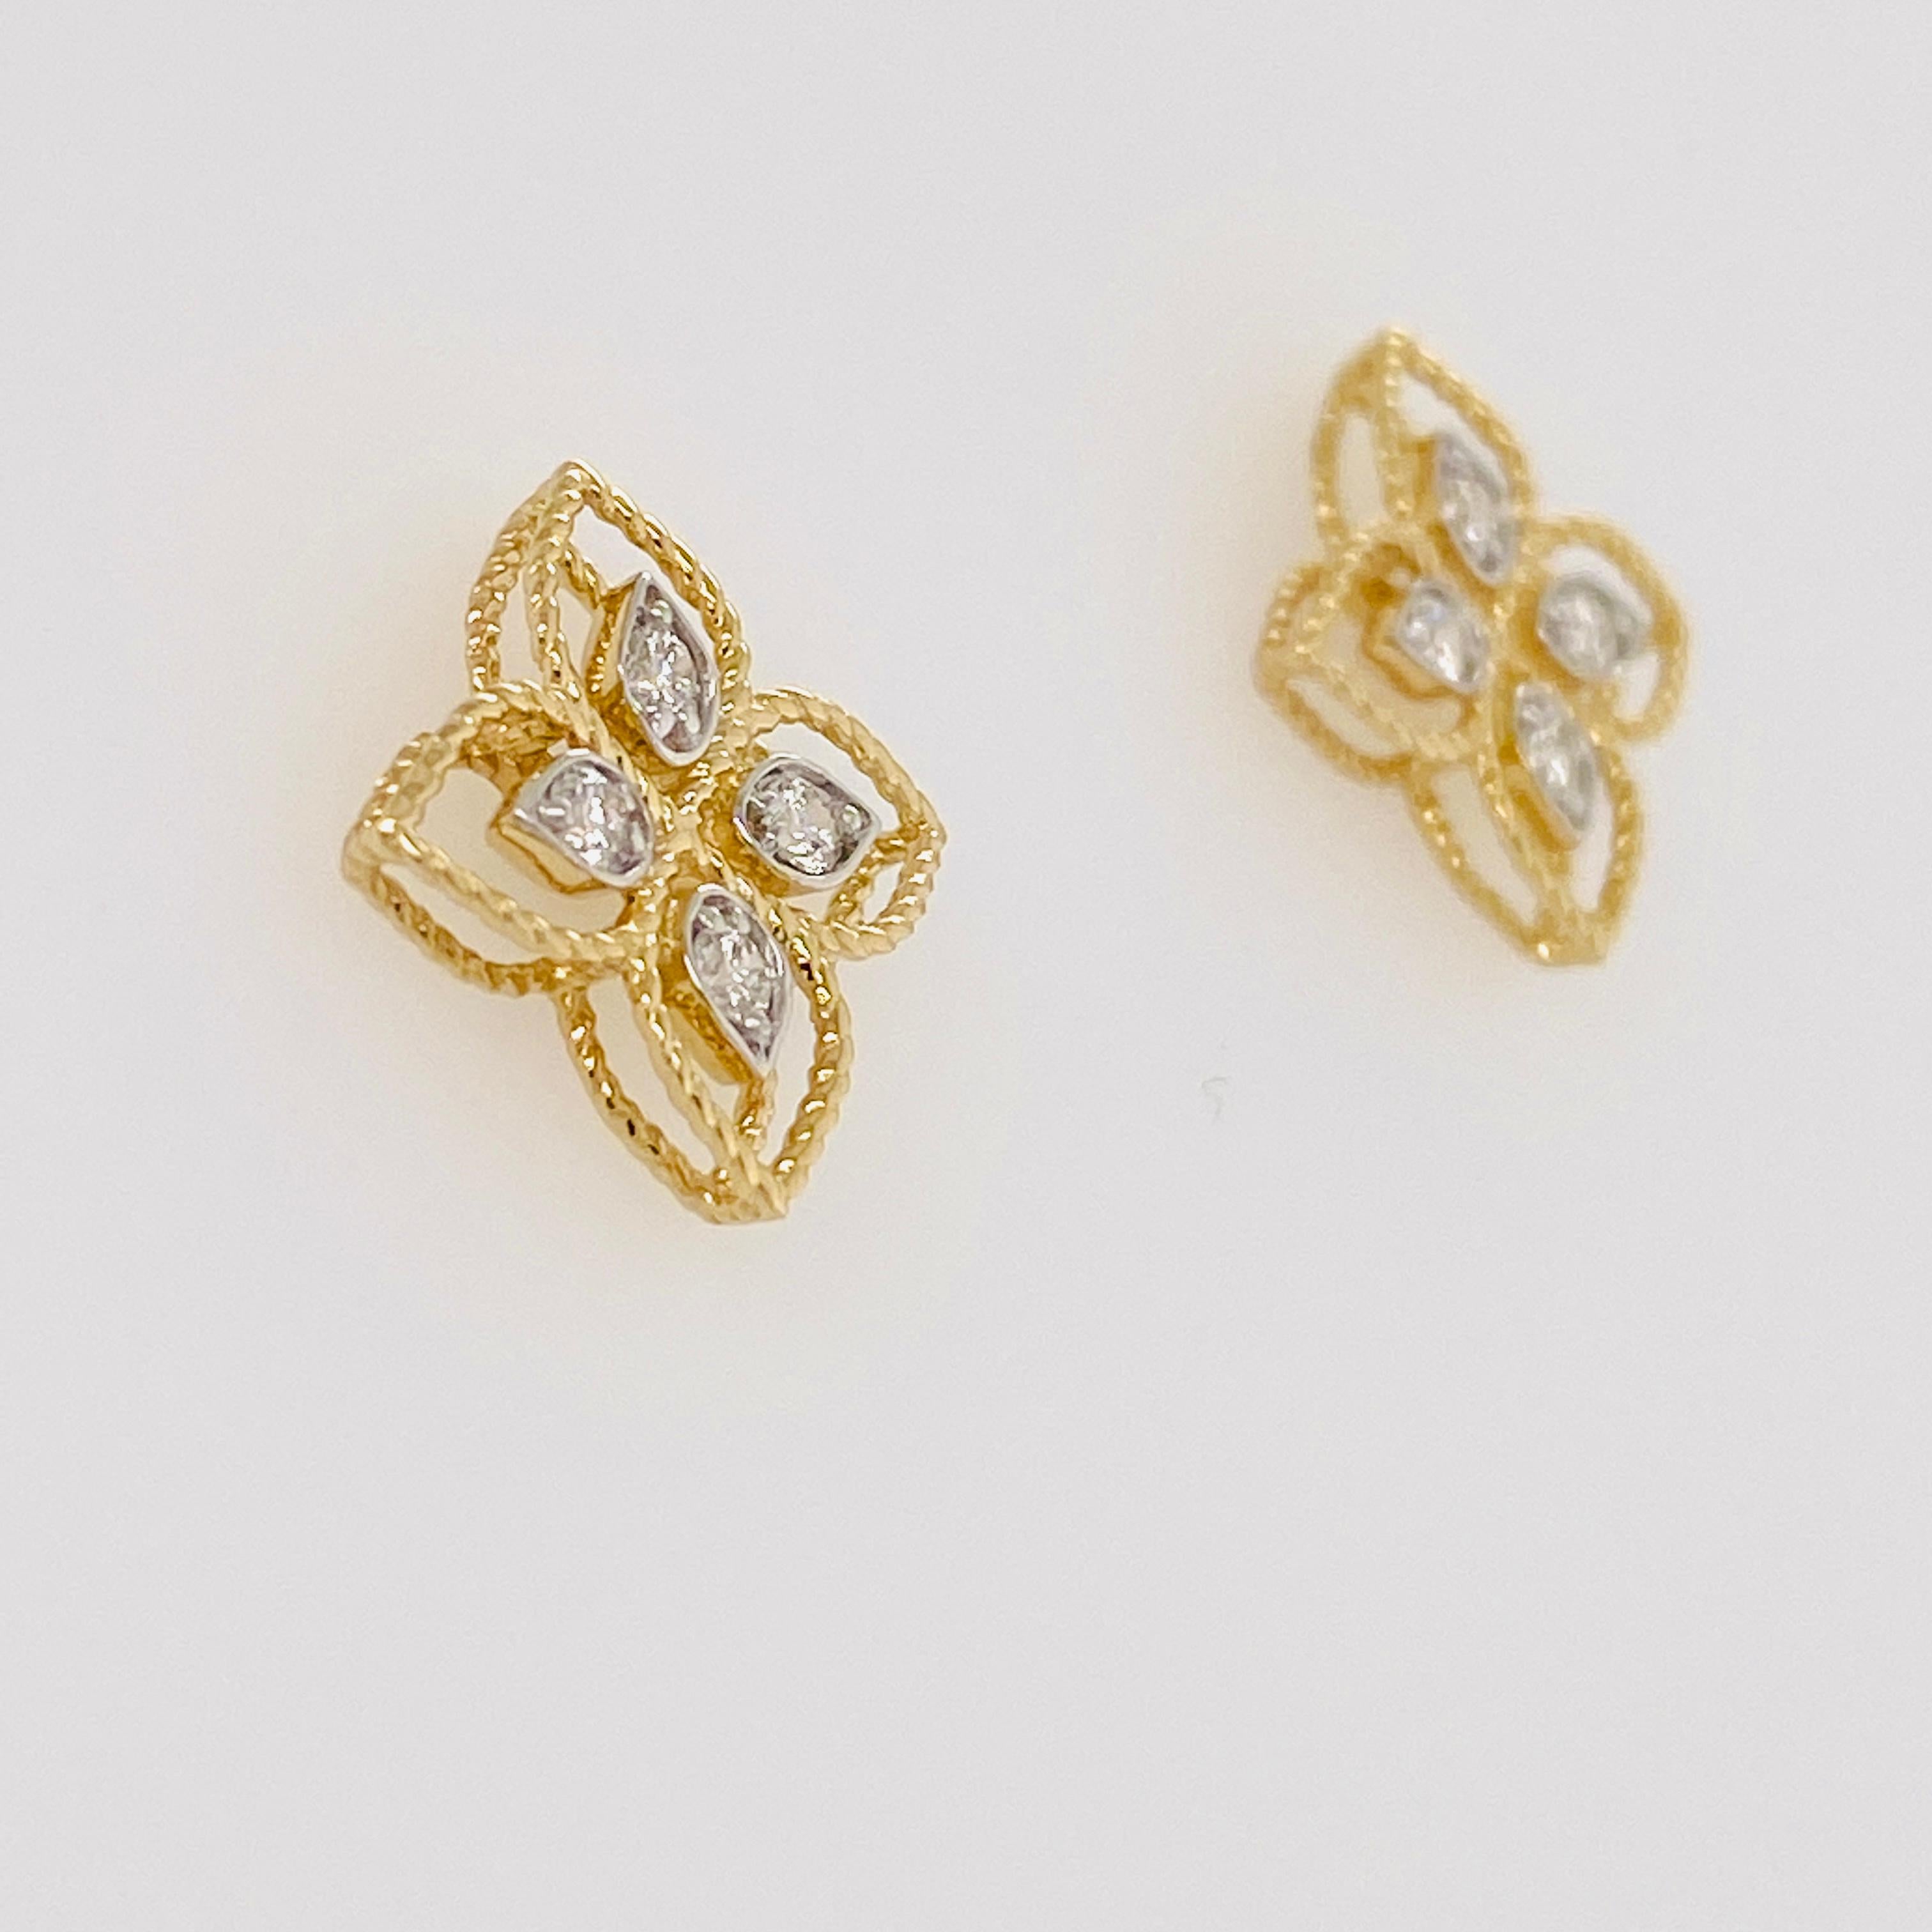 These intricate earrings are very detailed w a clover design that has four diamonds in each earring. There is a textured rope design on the earrings. The diamond weight is .18 carats and the diamonds are excellent quality-VS2 clarity and F/G color.